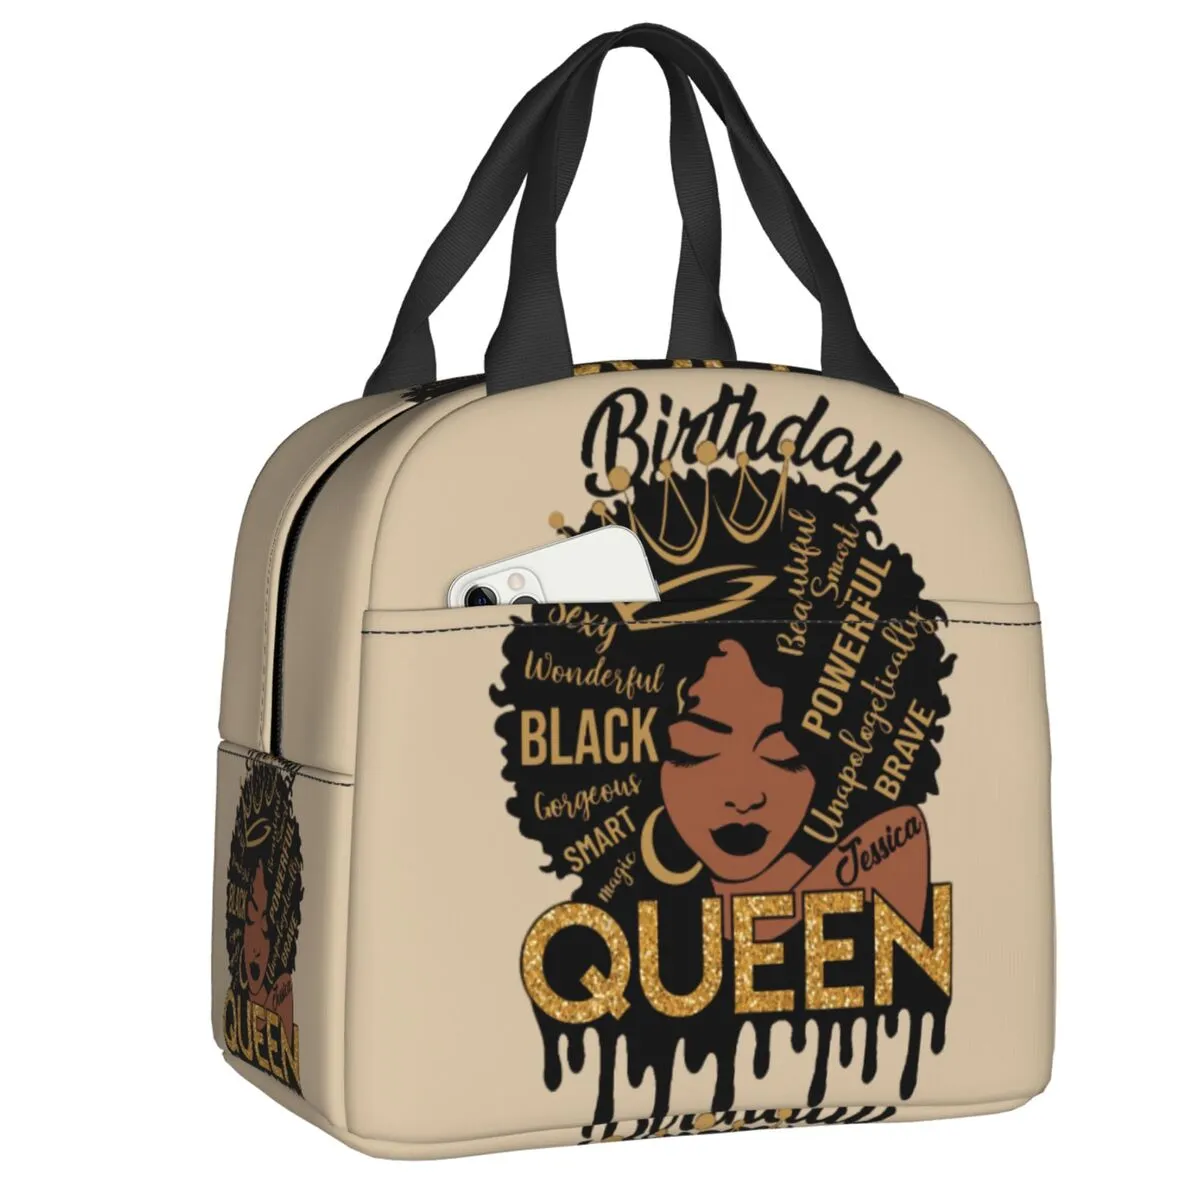 Birthday Queen Black Women Lunch Bag Hot Cold Snacks Insulated Lunch Boxes for Kids School Work Picnic Food Tote Container